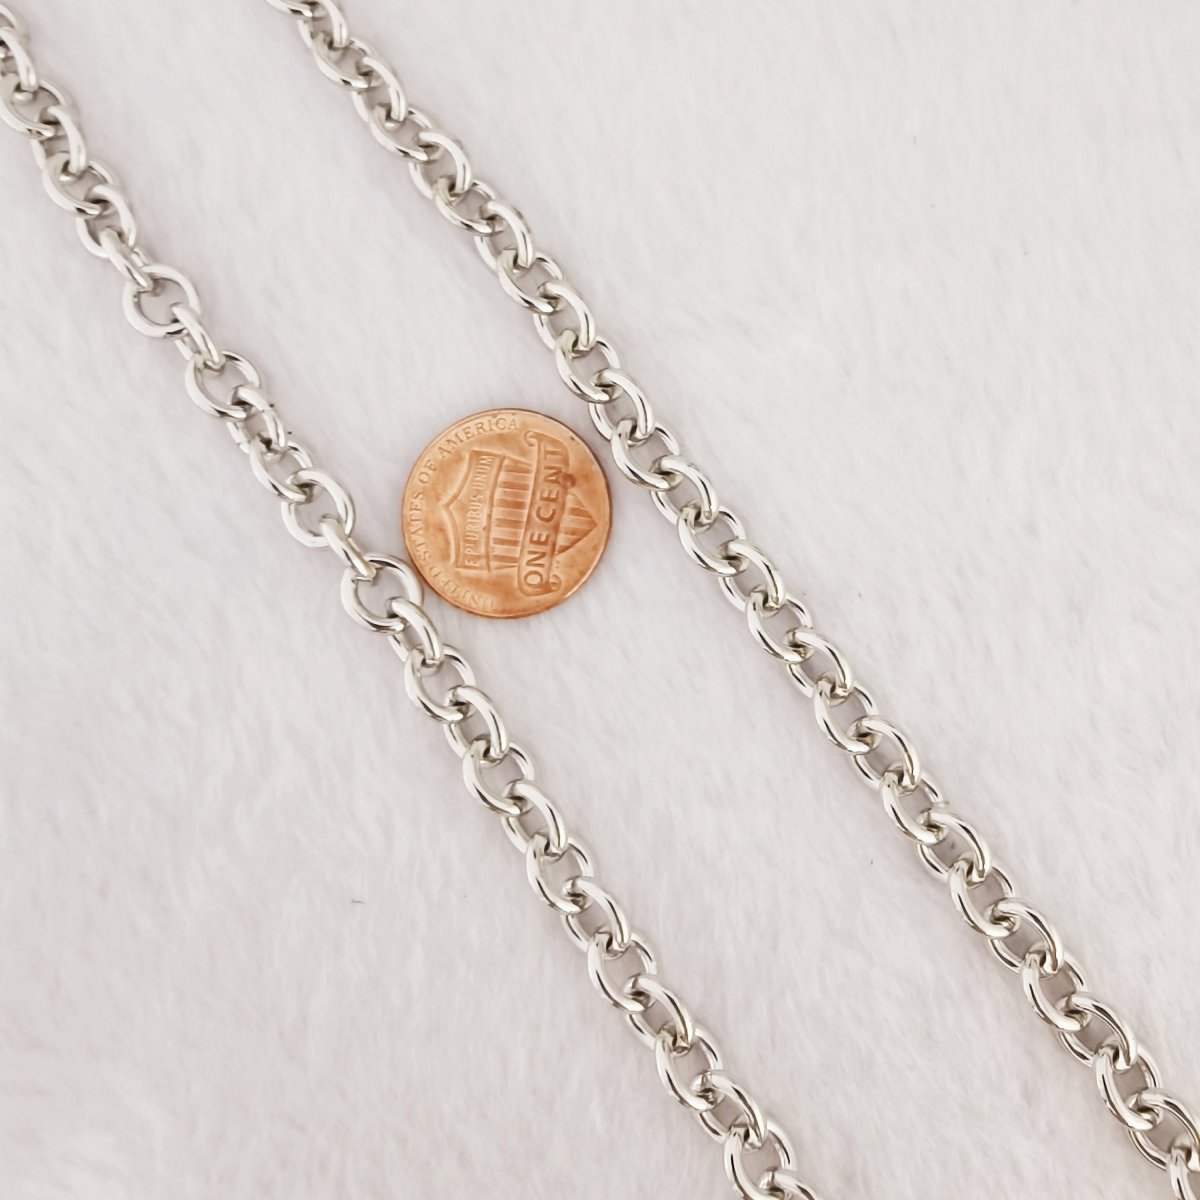 Clearance Pricing BLOWOUT Silver Chunky Round Chains, Link Size 7x7mm, 24k Gold Filled Thick Heavy Large Chain by the Yard Unfinished chain for Jewelry Supply #x004 - DLUXCA